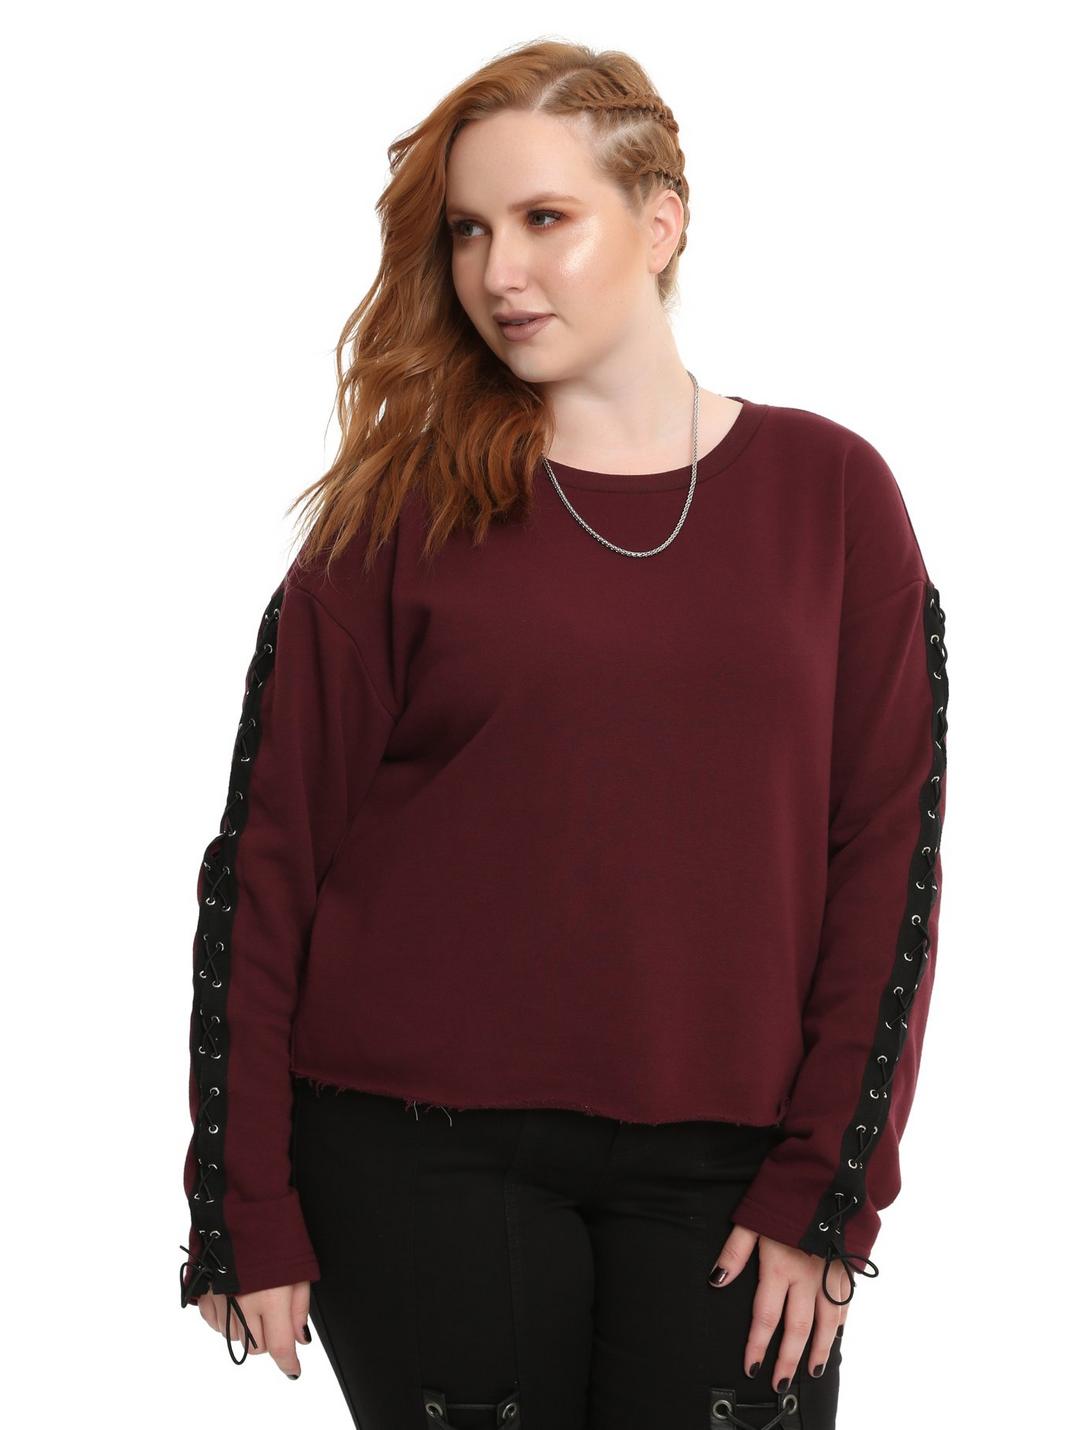 Burgundy Lace-Up Long-Sleeve Girls Top Plus Size, BURGUNDY, hi-res